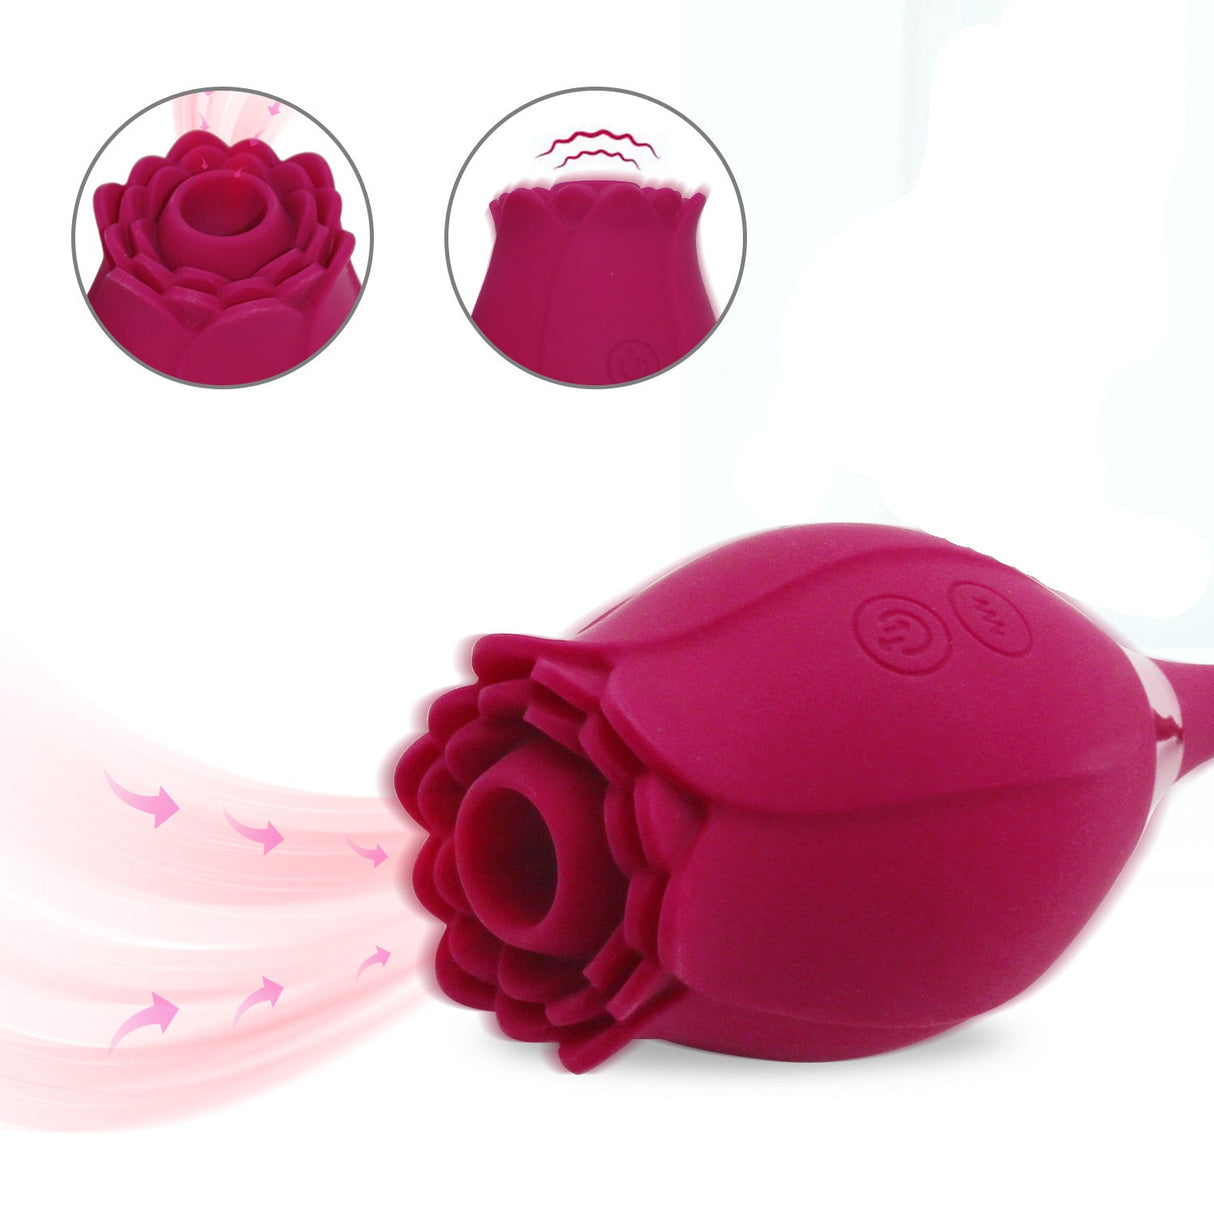 Rose Sucking Vibrator Toy for Women with Vibrating Egg